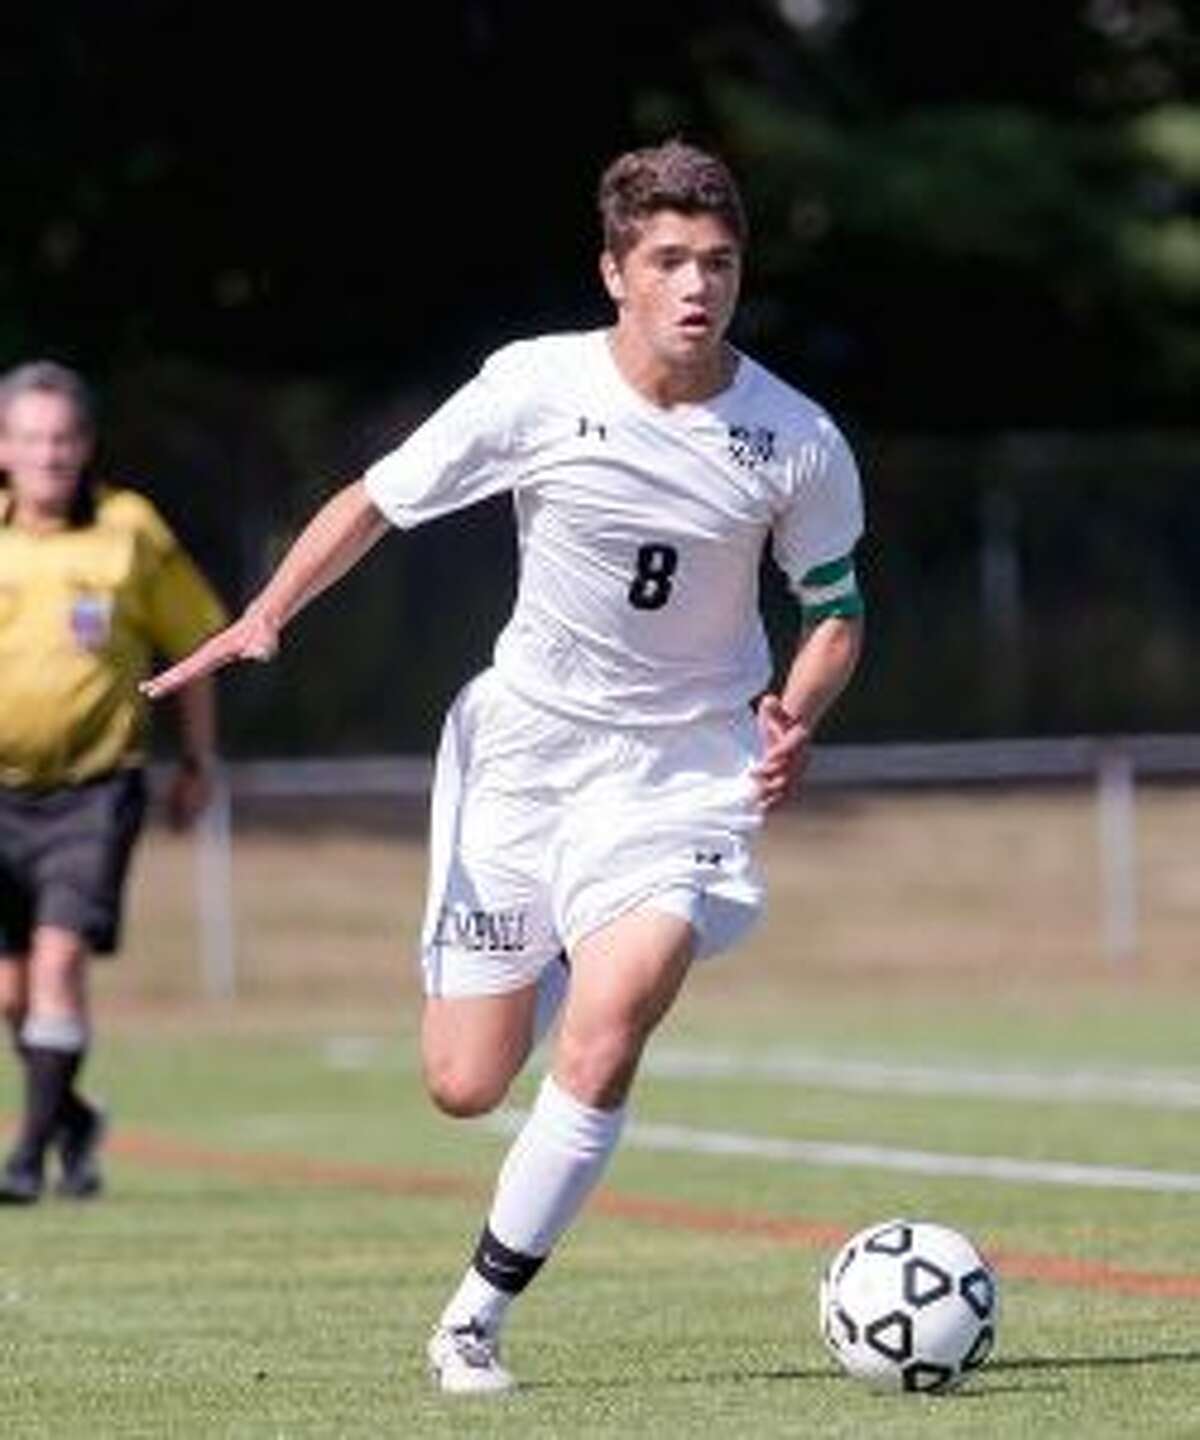 Trumbull's Chris Lancia has played a large role in the Eagles going unbeaten. — David G. Whitham photo